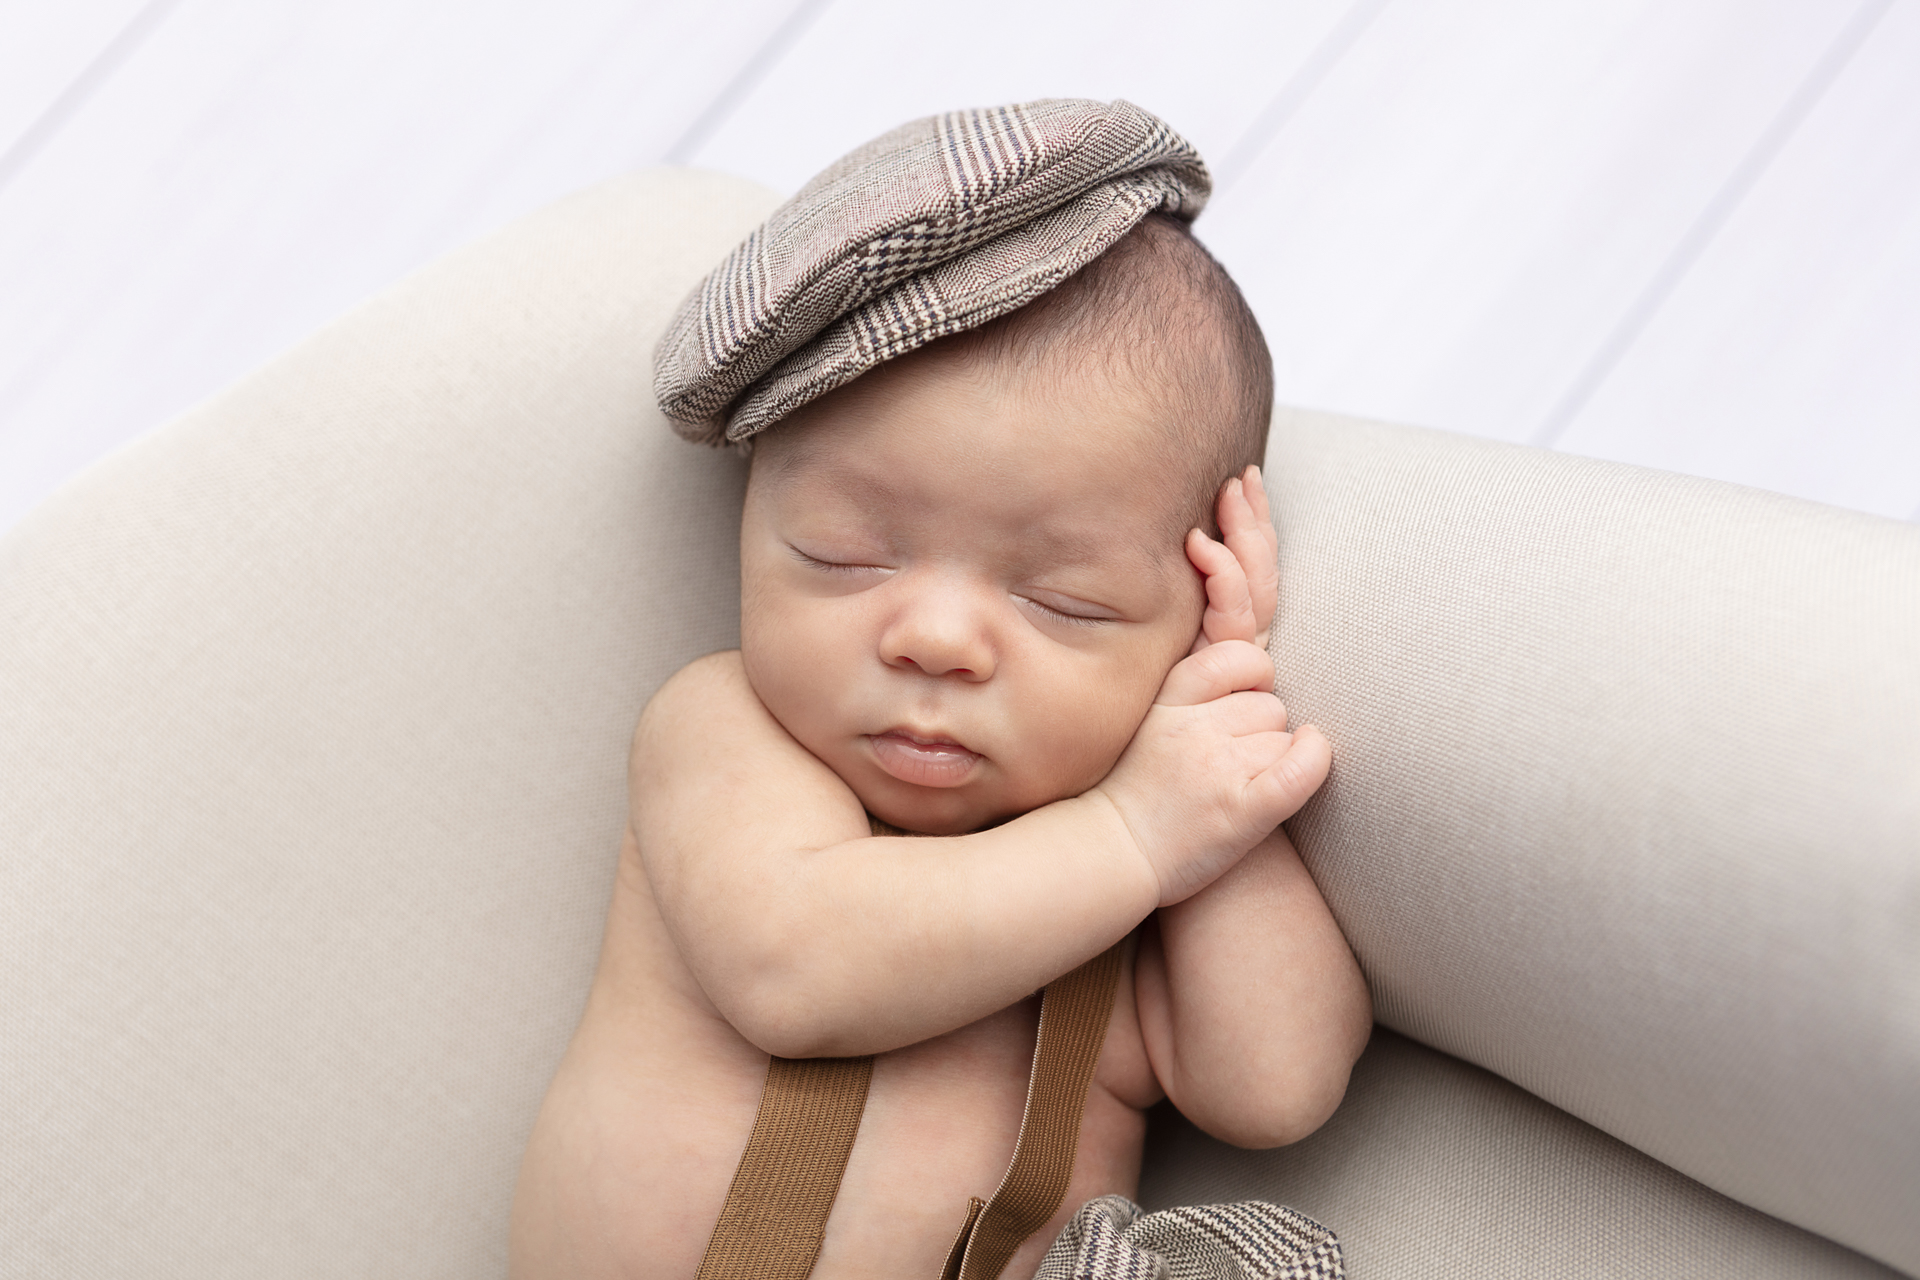 newborn baby boy with his hands folded under his head, wearing a plaid cap; CT baby photography